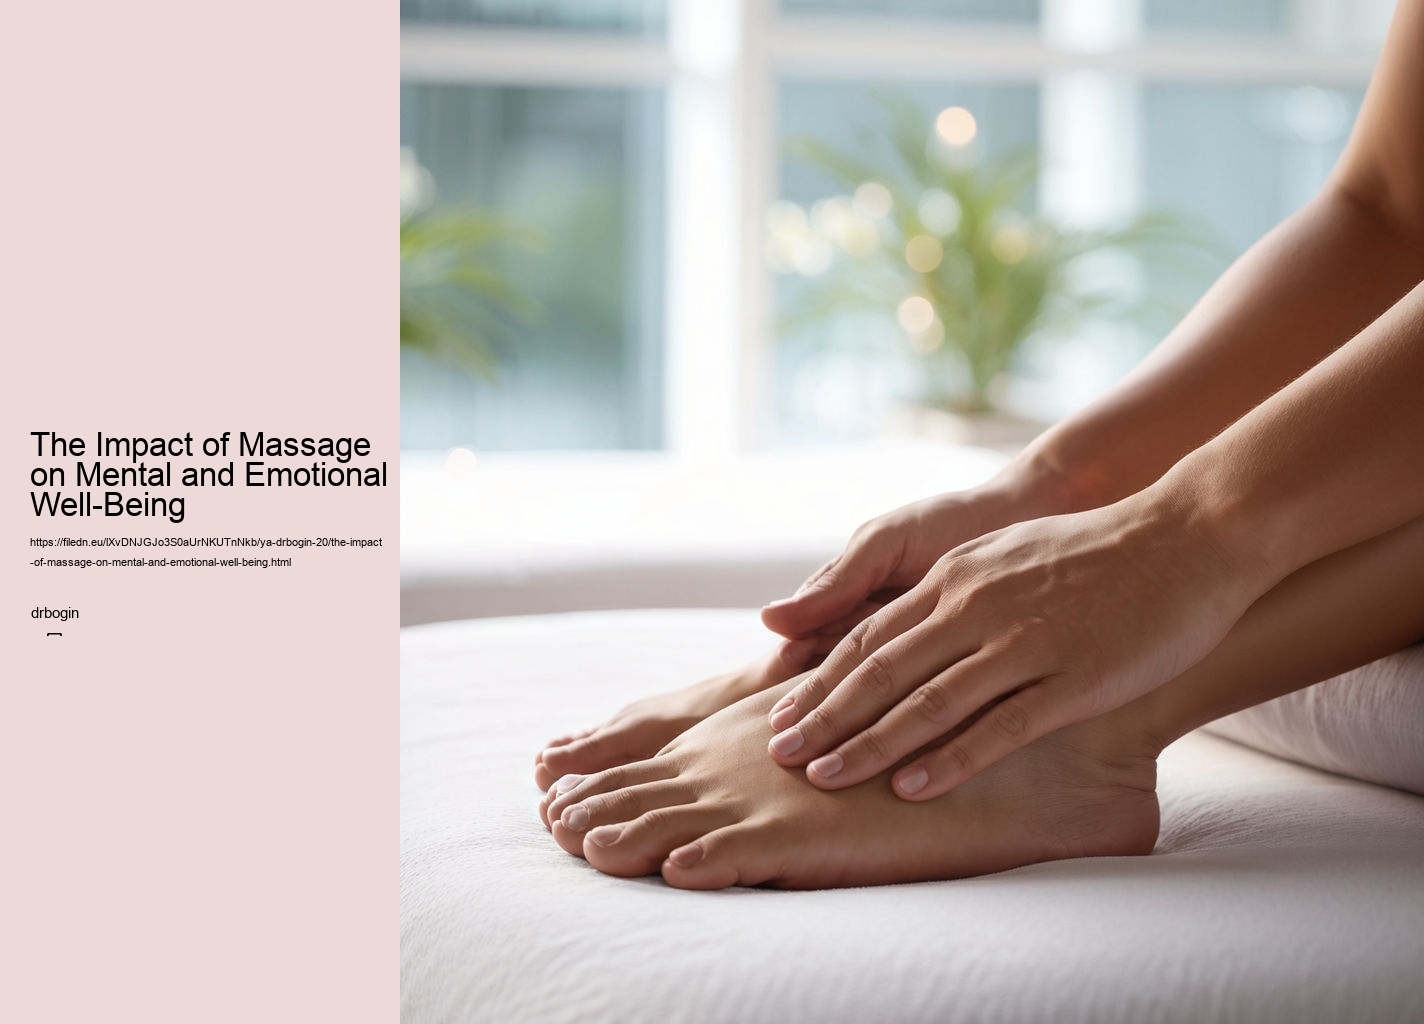 The Impact of Massage on Mental and Emotional Well-Being